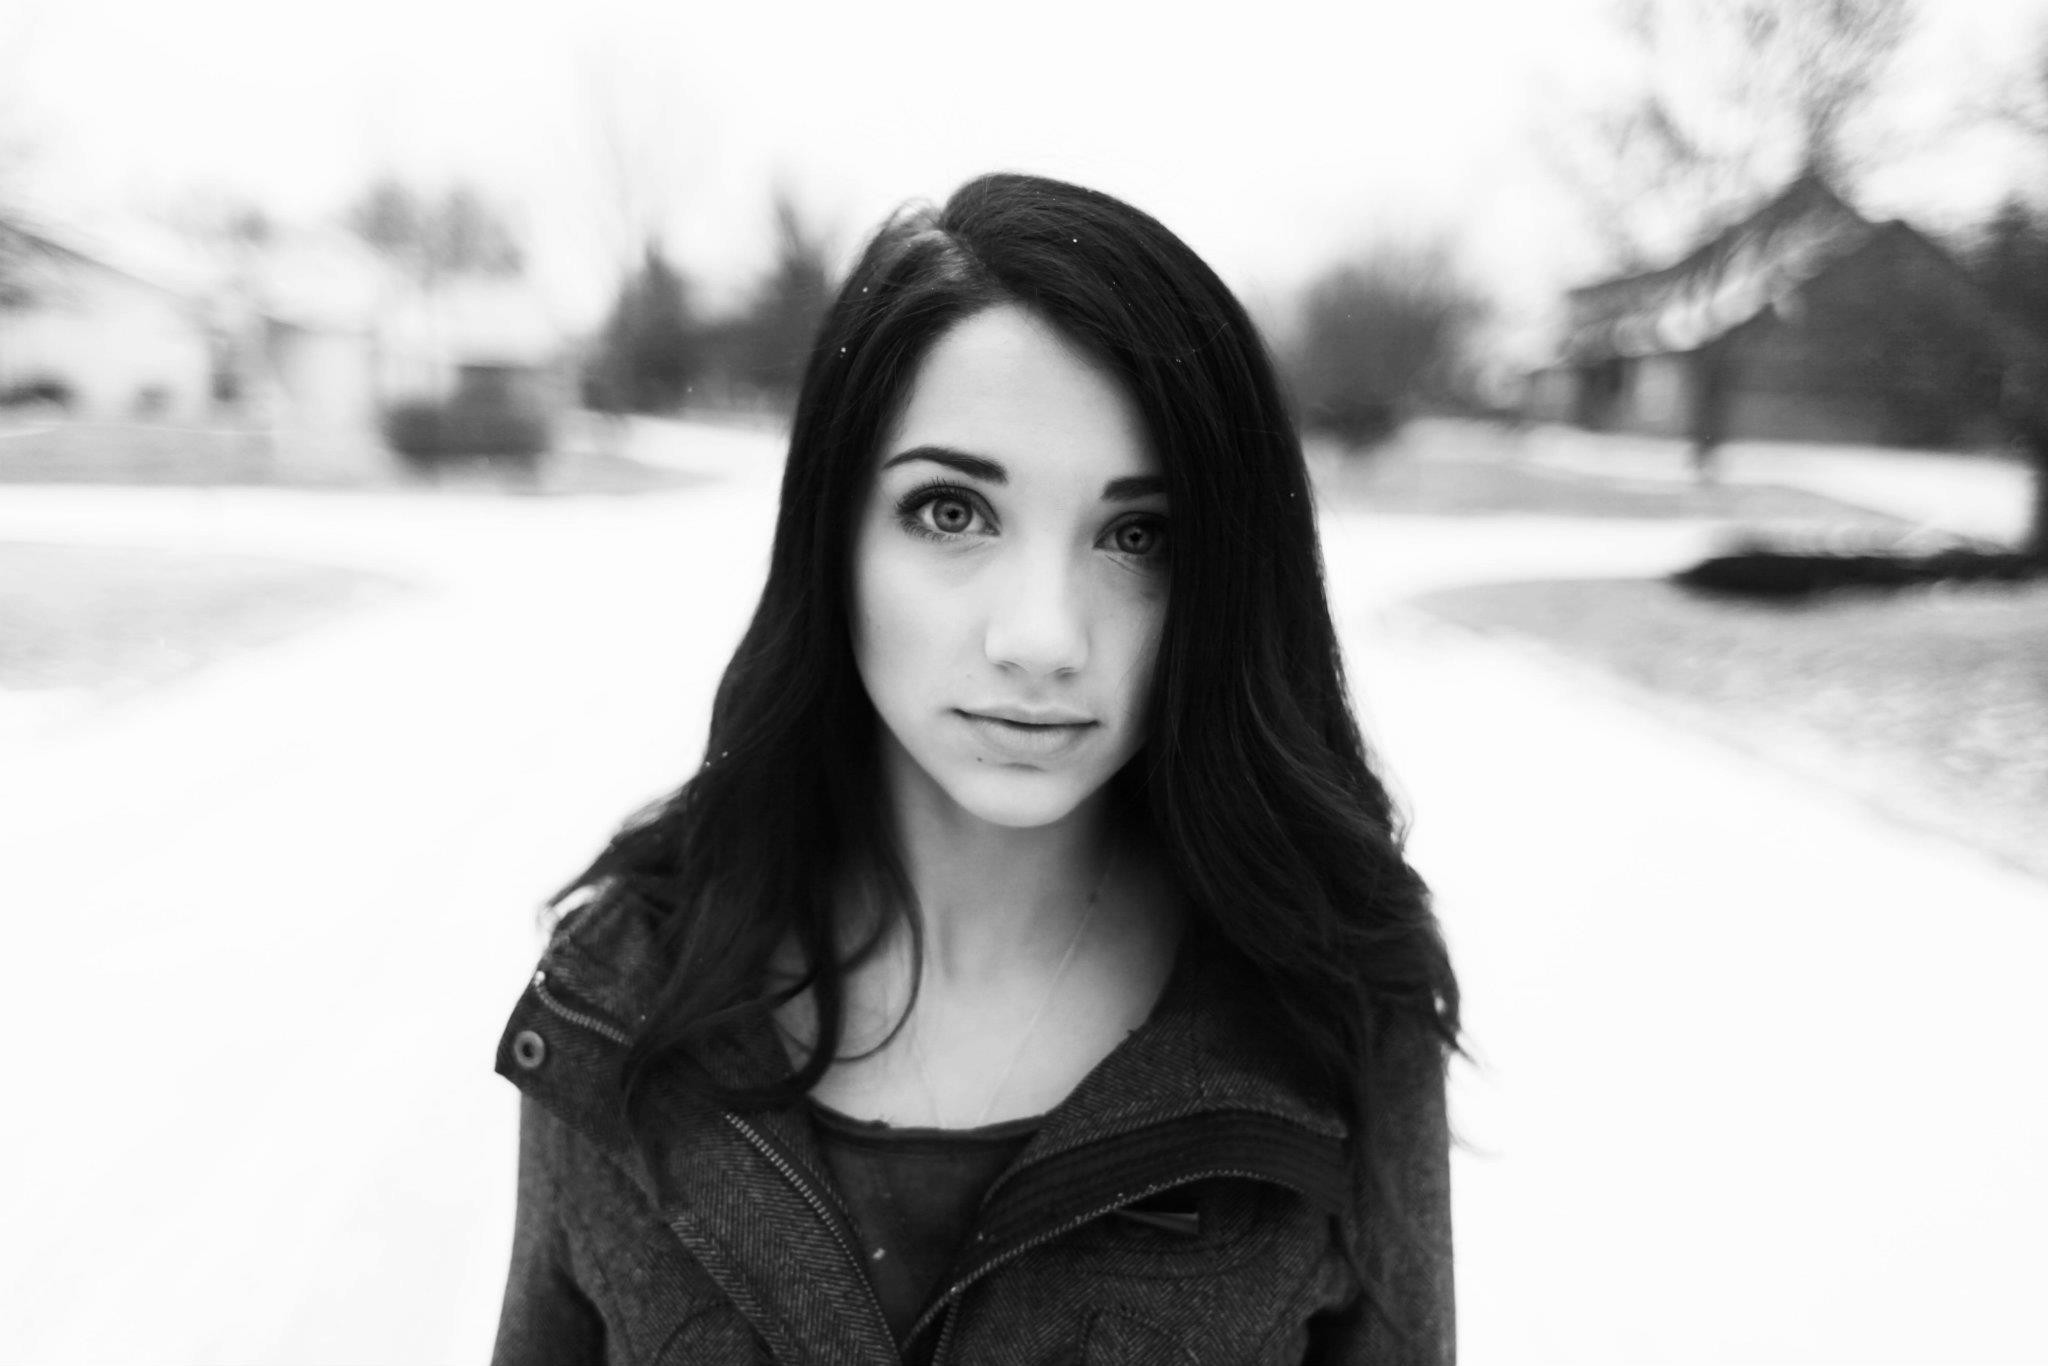 People 2048x1366 women monochrome dark hair snow sepia long hair Emily Rudd women outdoors looking at viewer celebrity actress black hair frontal view portrait